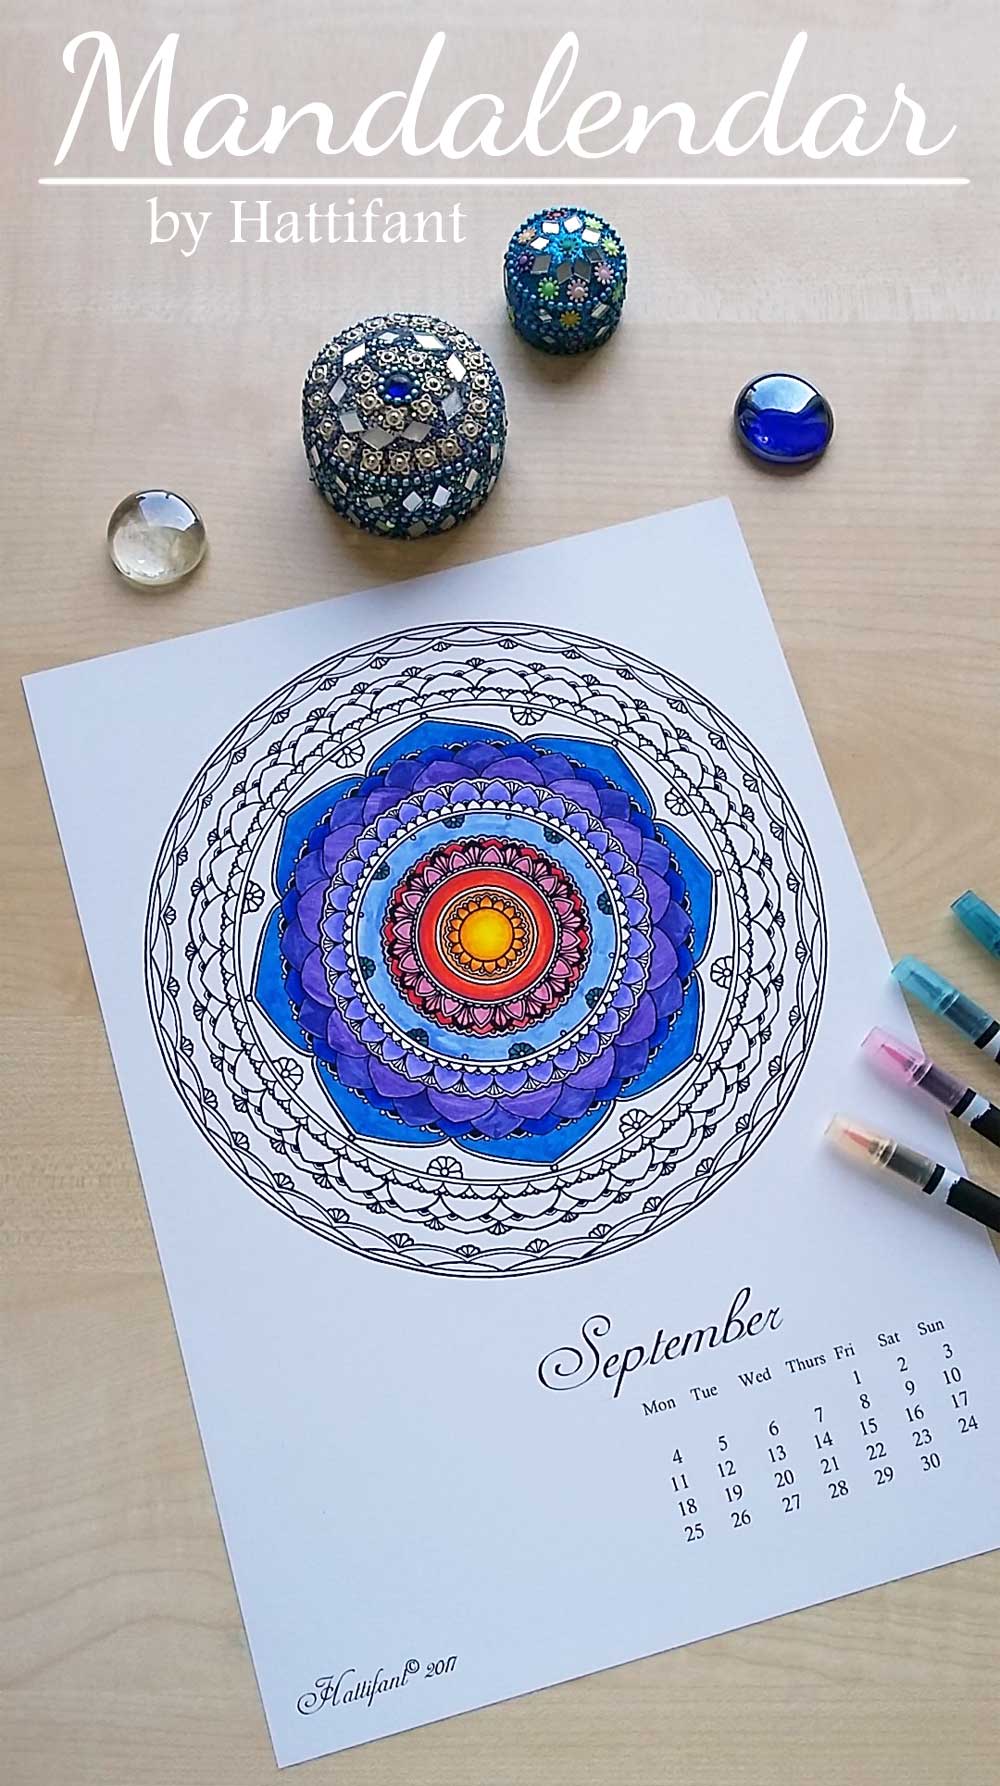 Hattifant's Mandalandar 2017 a Mandala Calendar Coloring Page to download for free during August